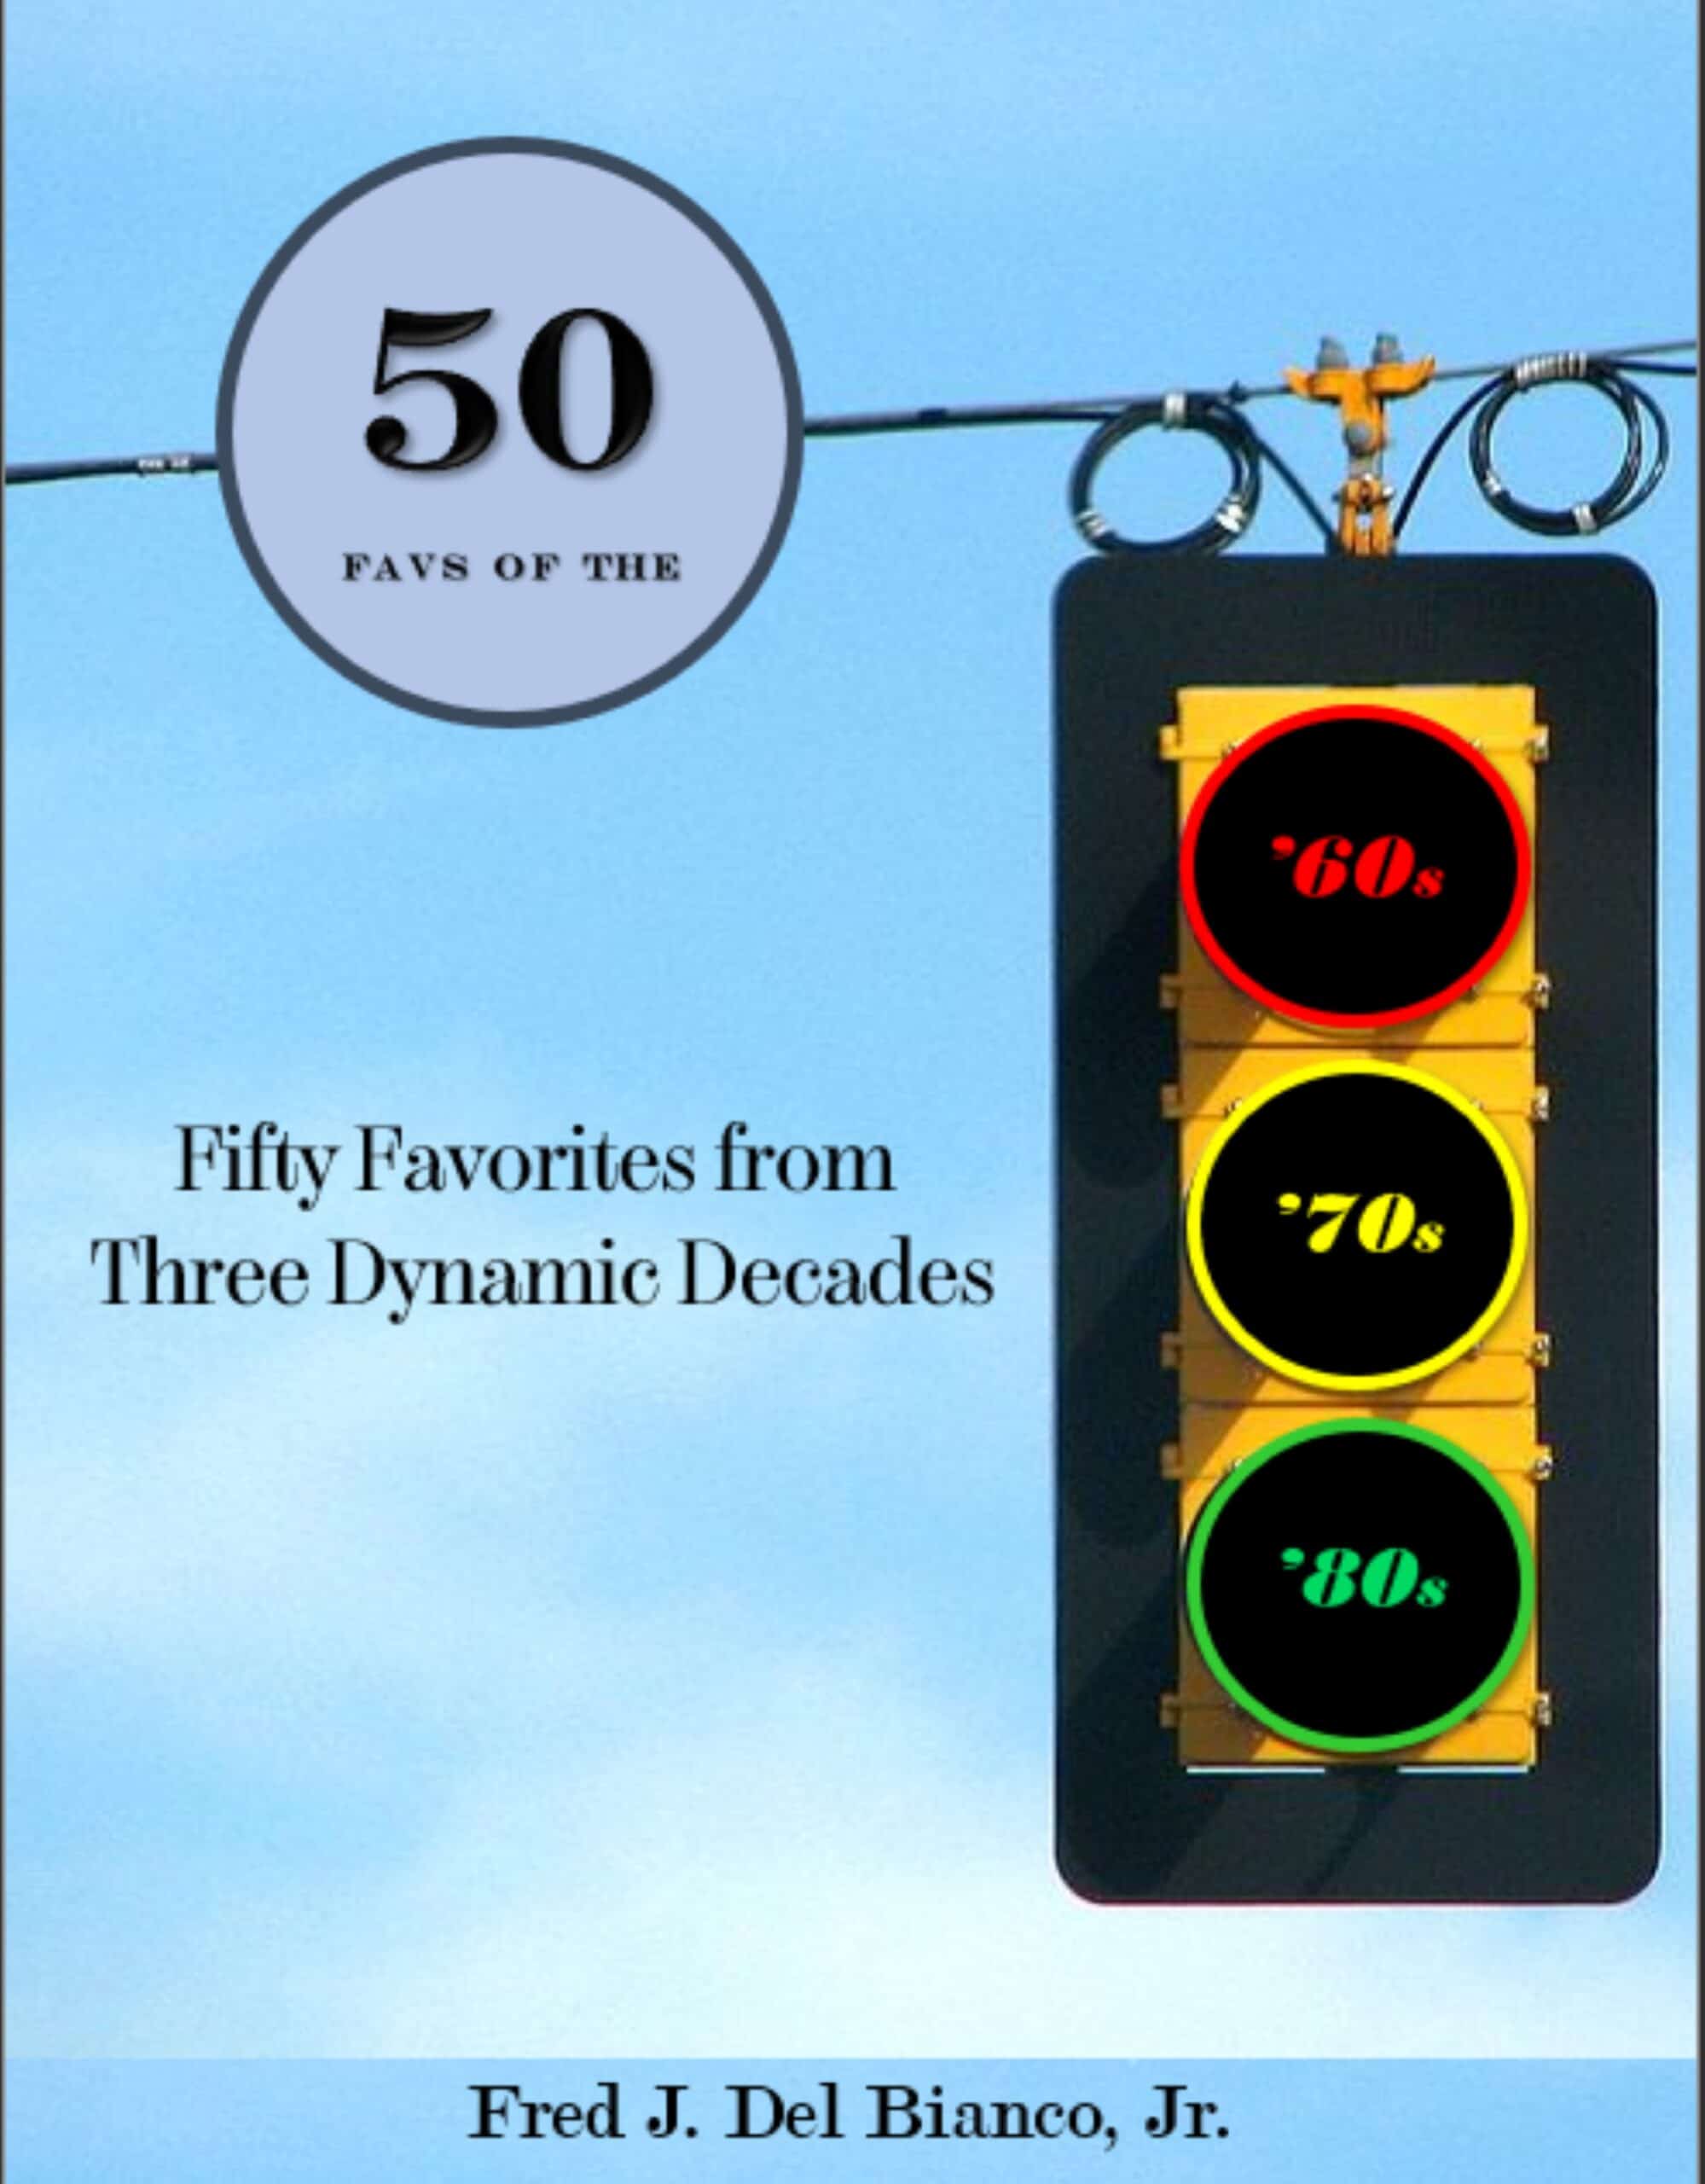 "Fifty Favs" book cover